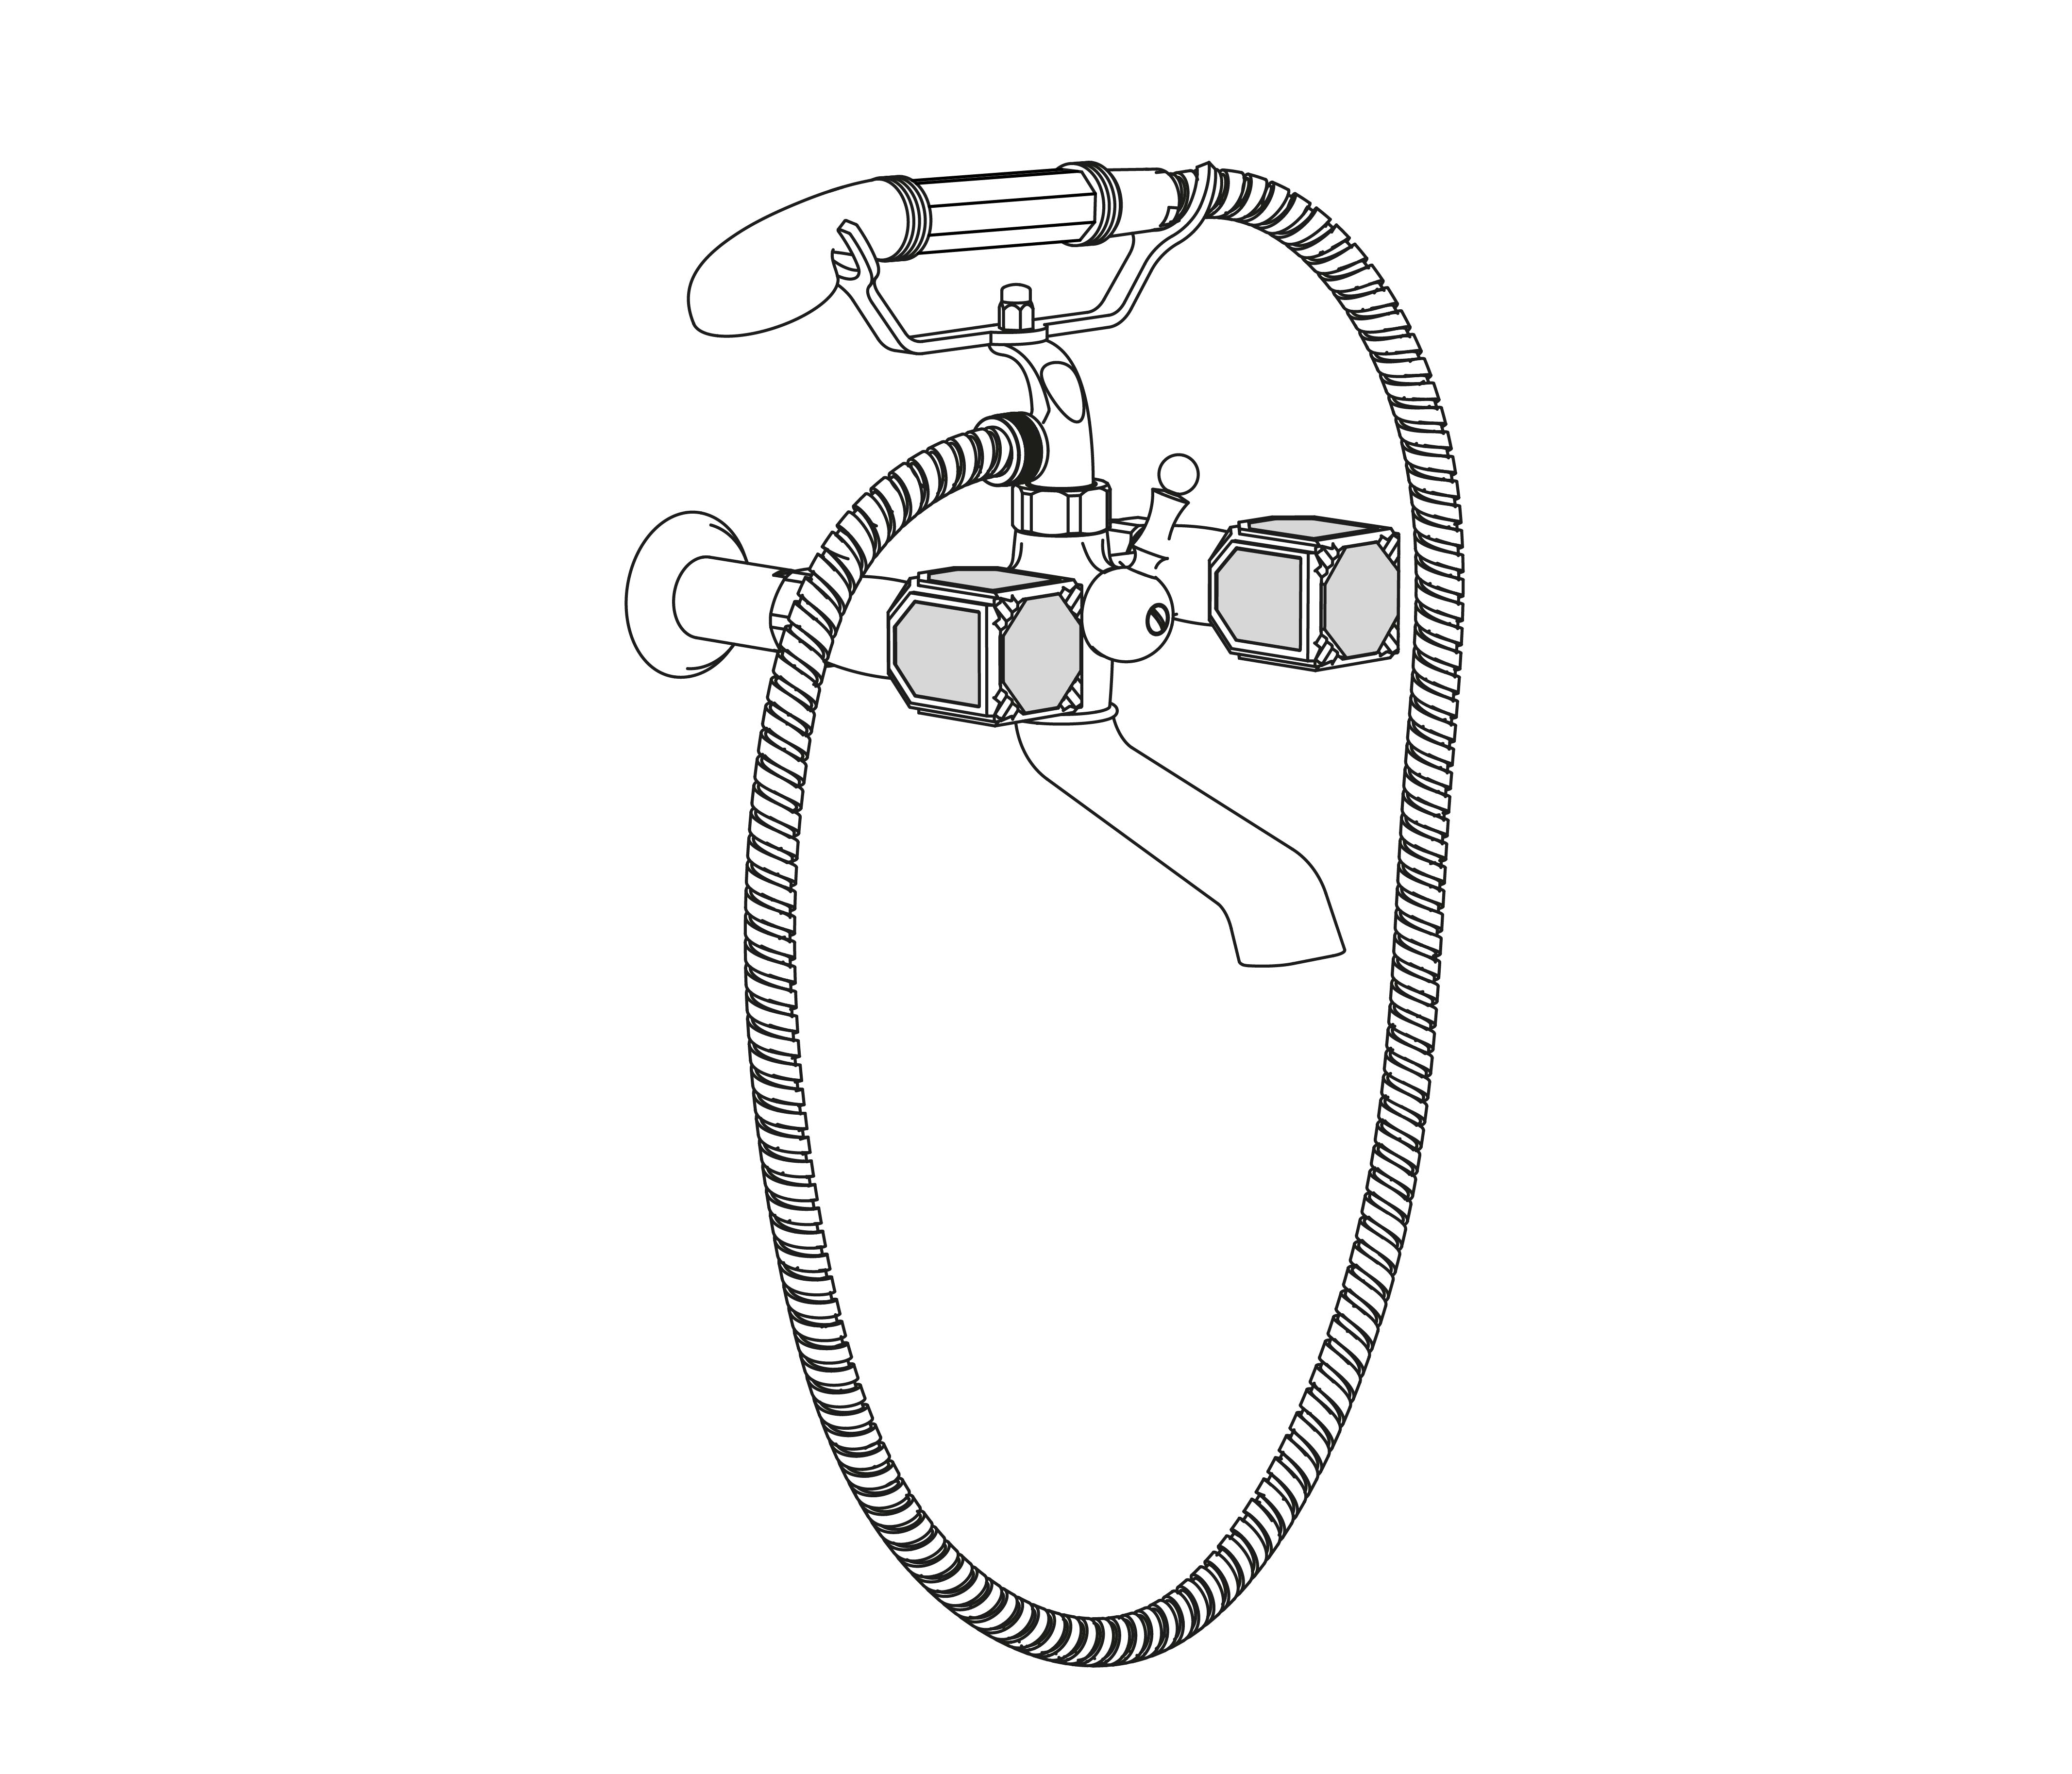 S59-3201 Wall mounted bath and shower mixer